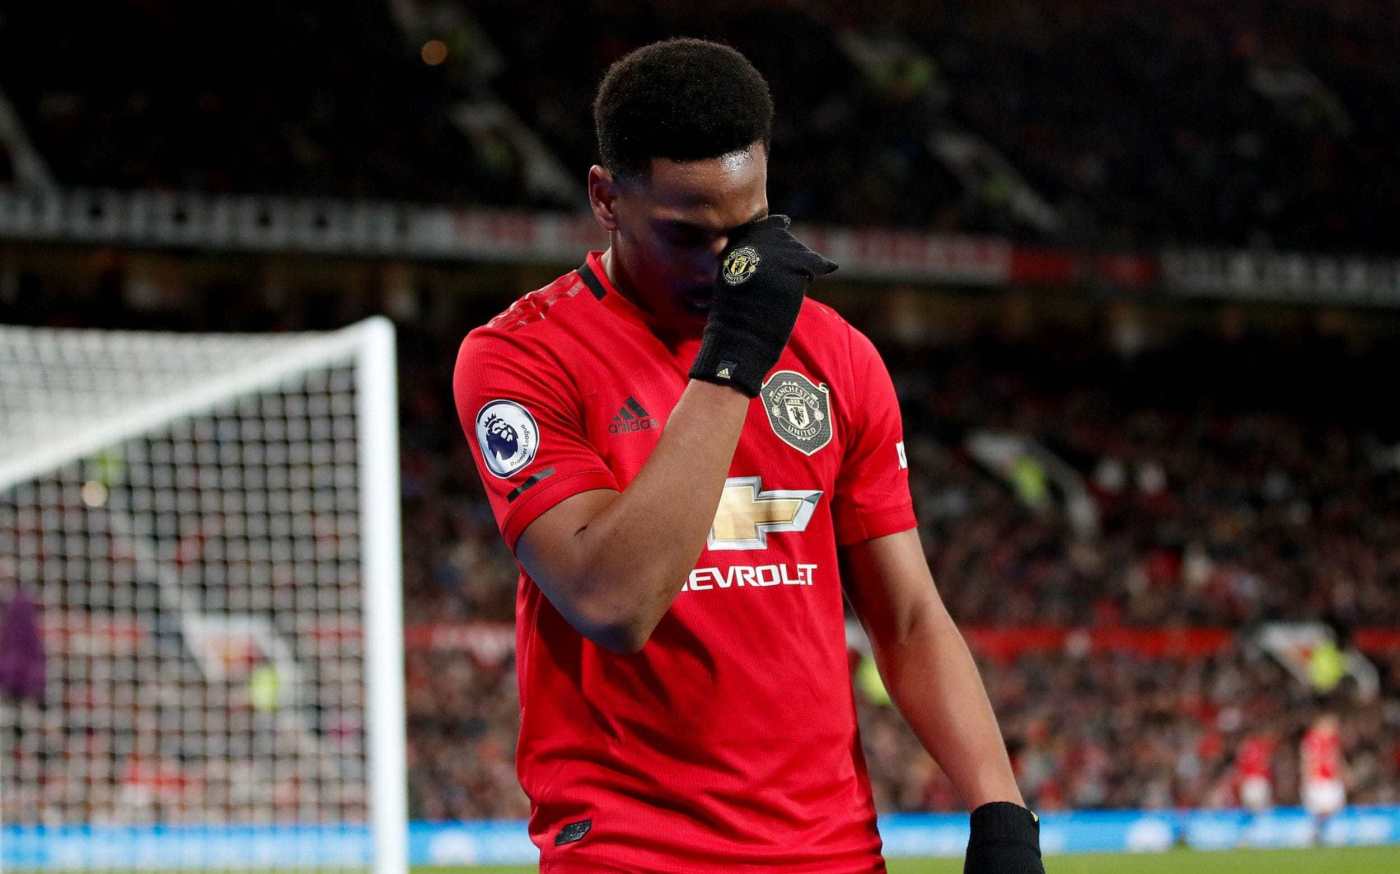 Paul Ince slams Anthony Martial with 'fizzy drink' comparison after latest Man Utd display - Bóng Đá